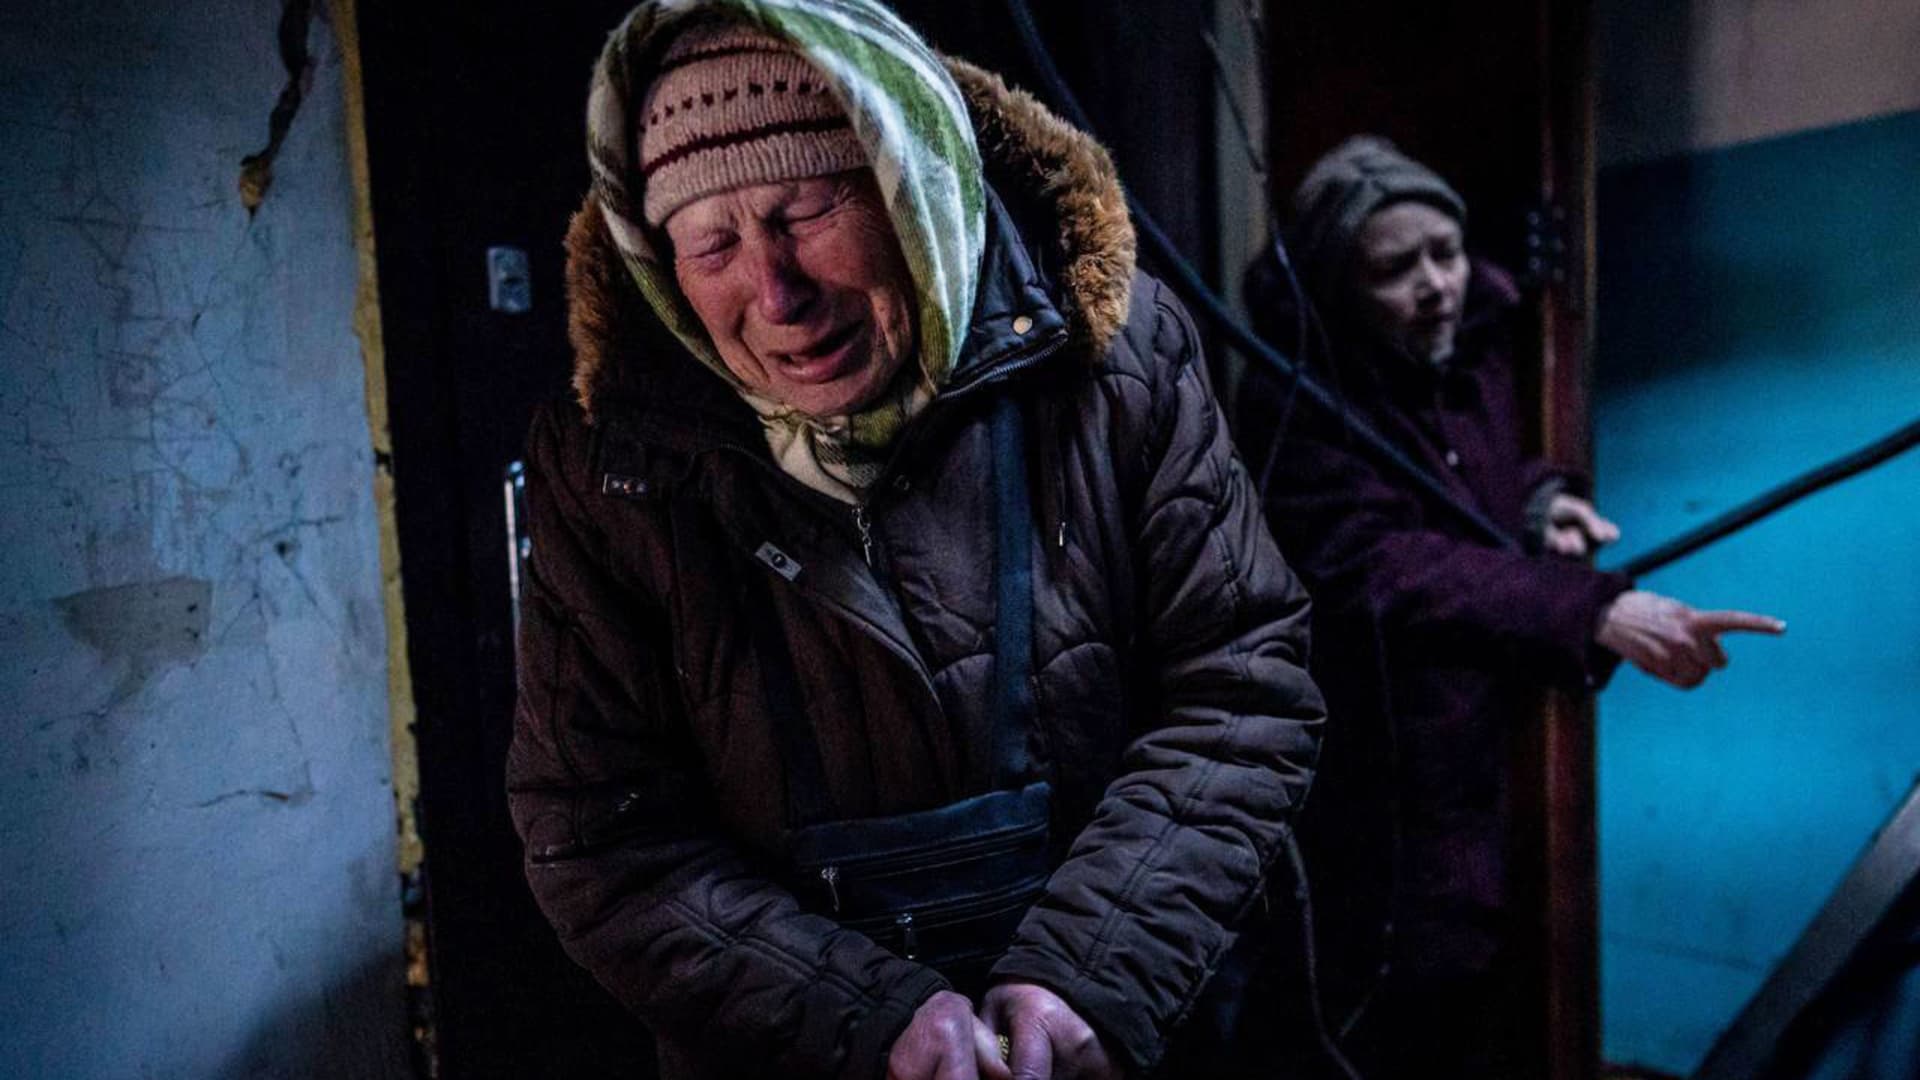 Alexandra, 86, cries after her apartment was destroyed by a grad rocket attack of the Russia in Kharkiv, Ukraine on March 15, 2022.